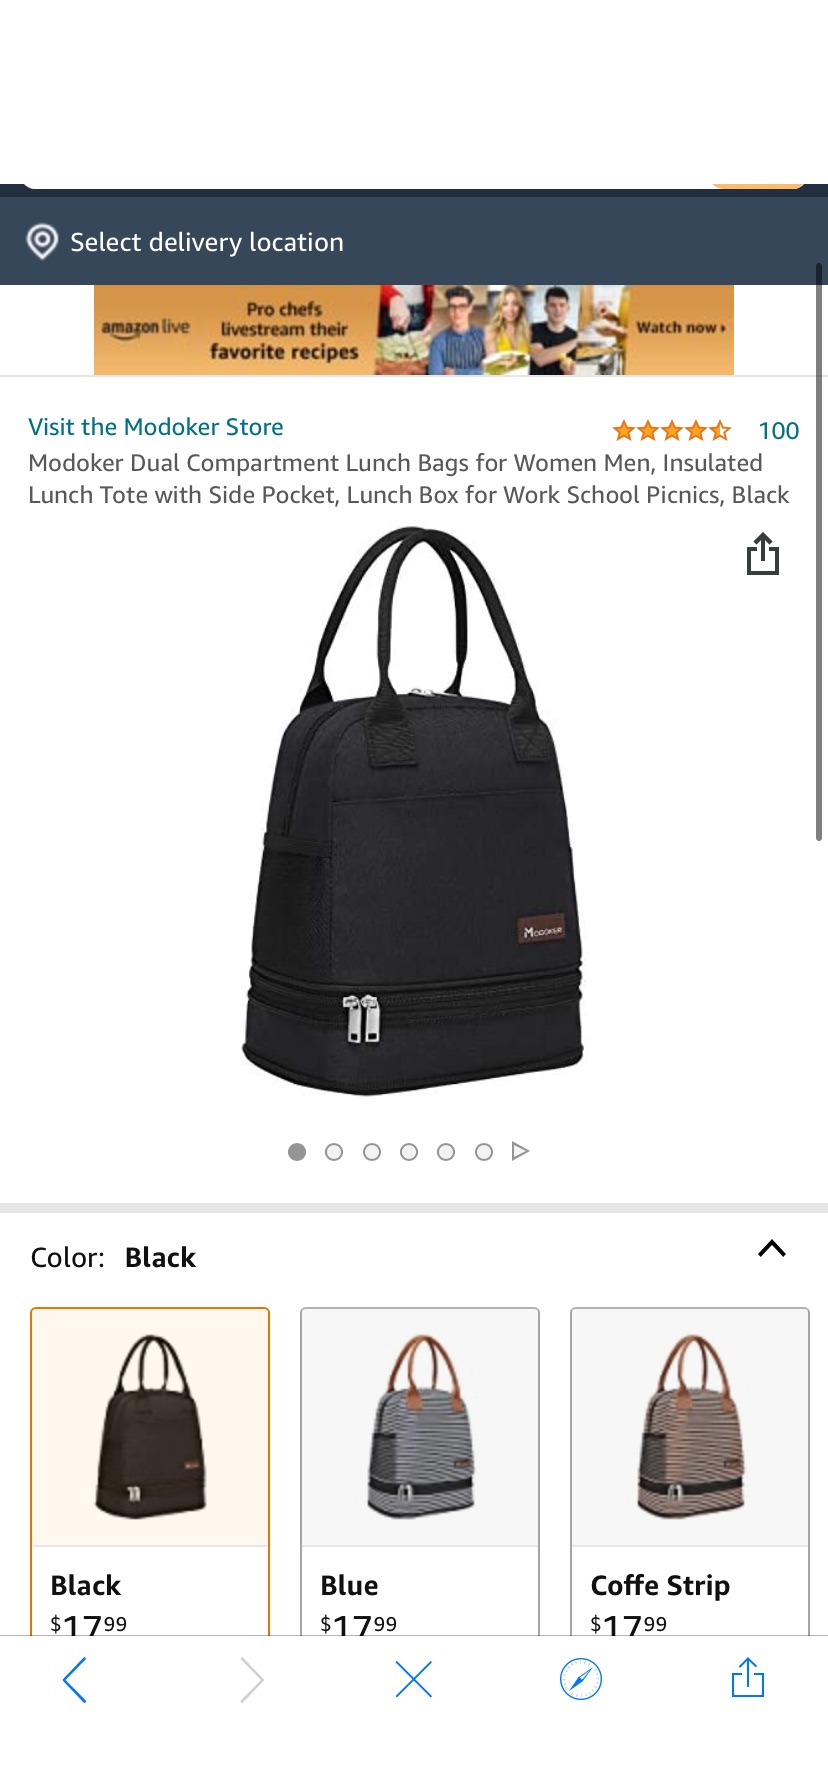 Amazon.com: Modoker Dual 午餐袋Compartment Lunch Bags for Women Men, Insulated Lunch Tote with Side Pocket, Lunch Box for Work School Picnics, Black: Kitchen & Dining